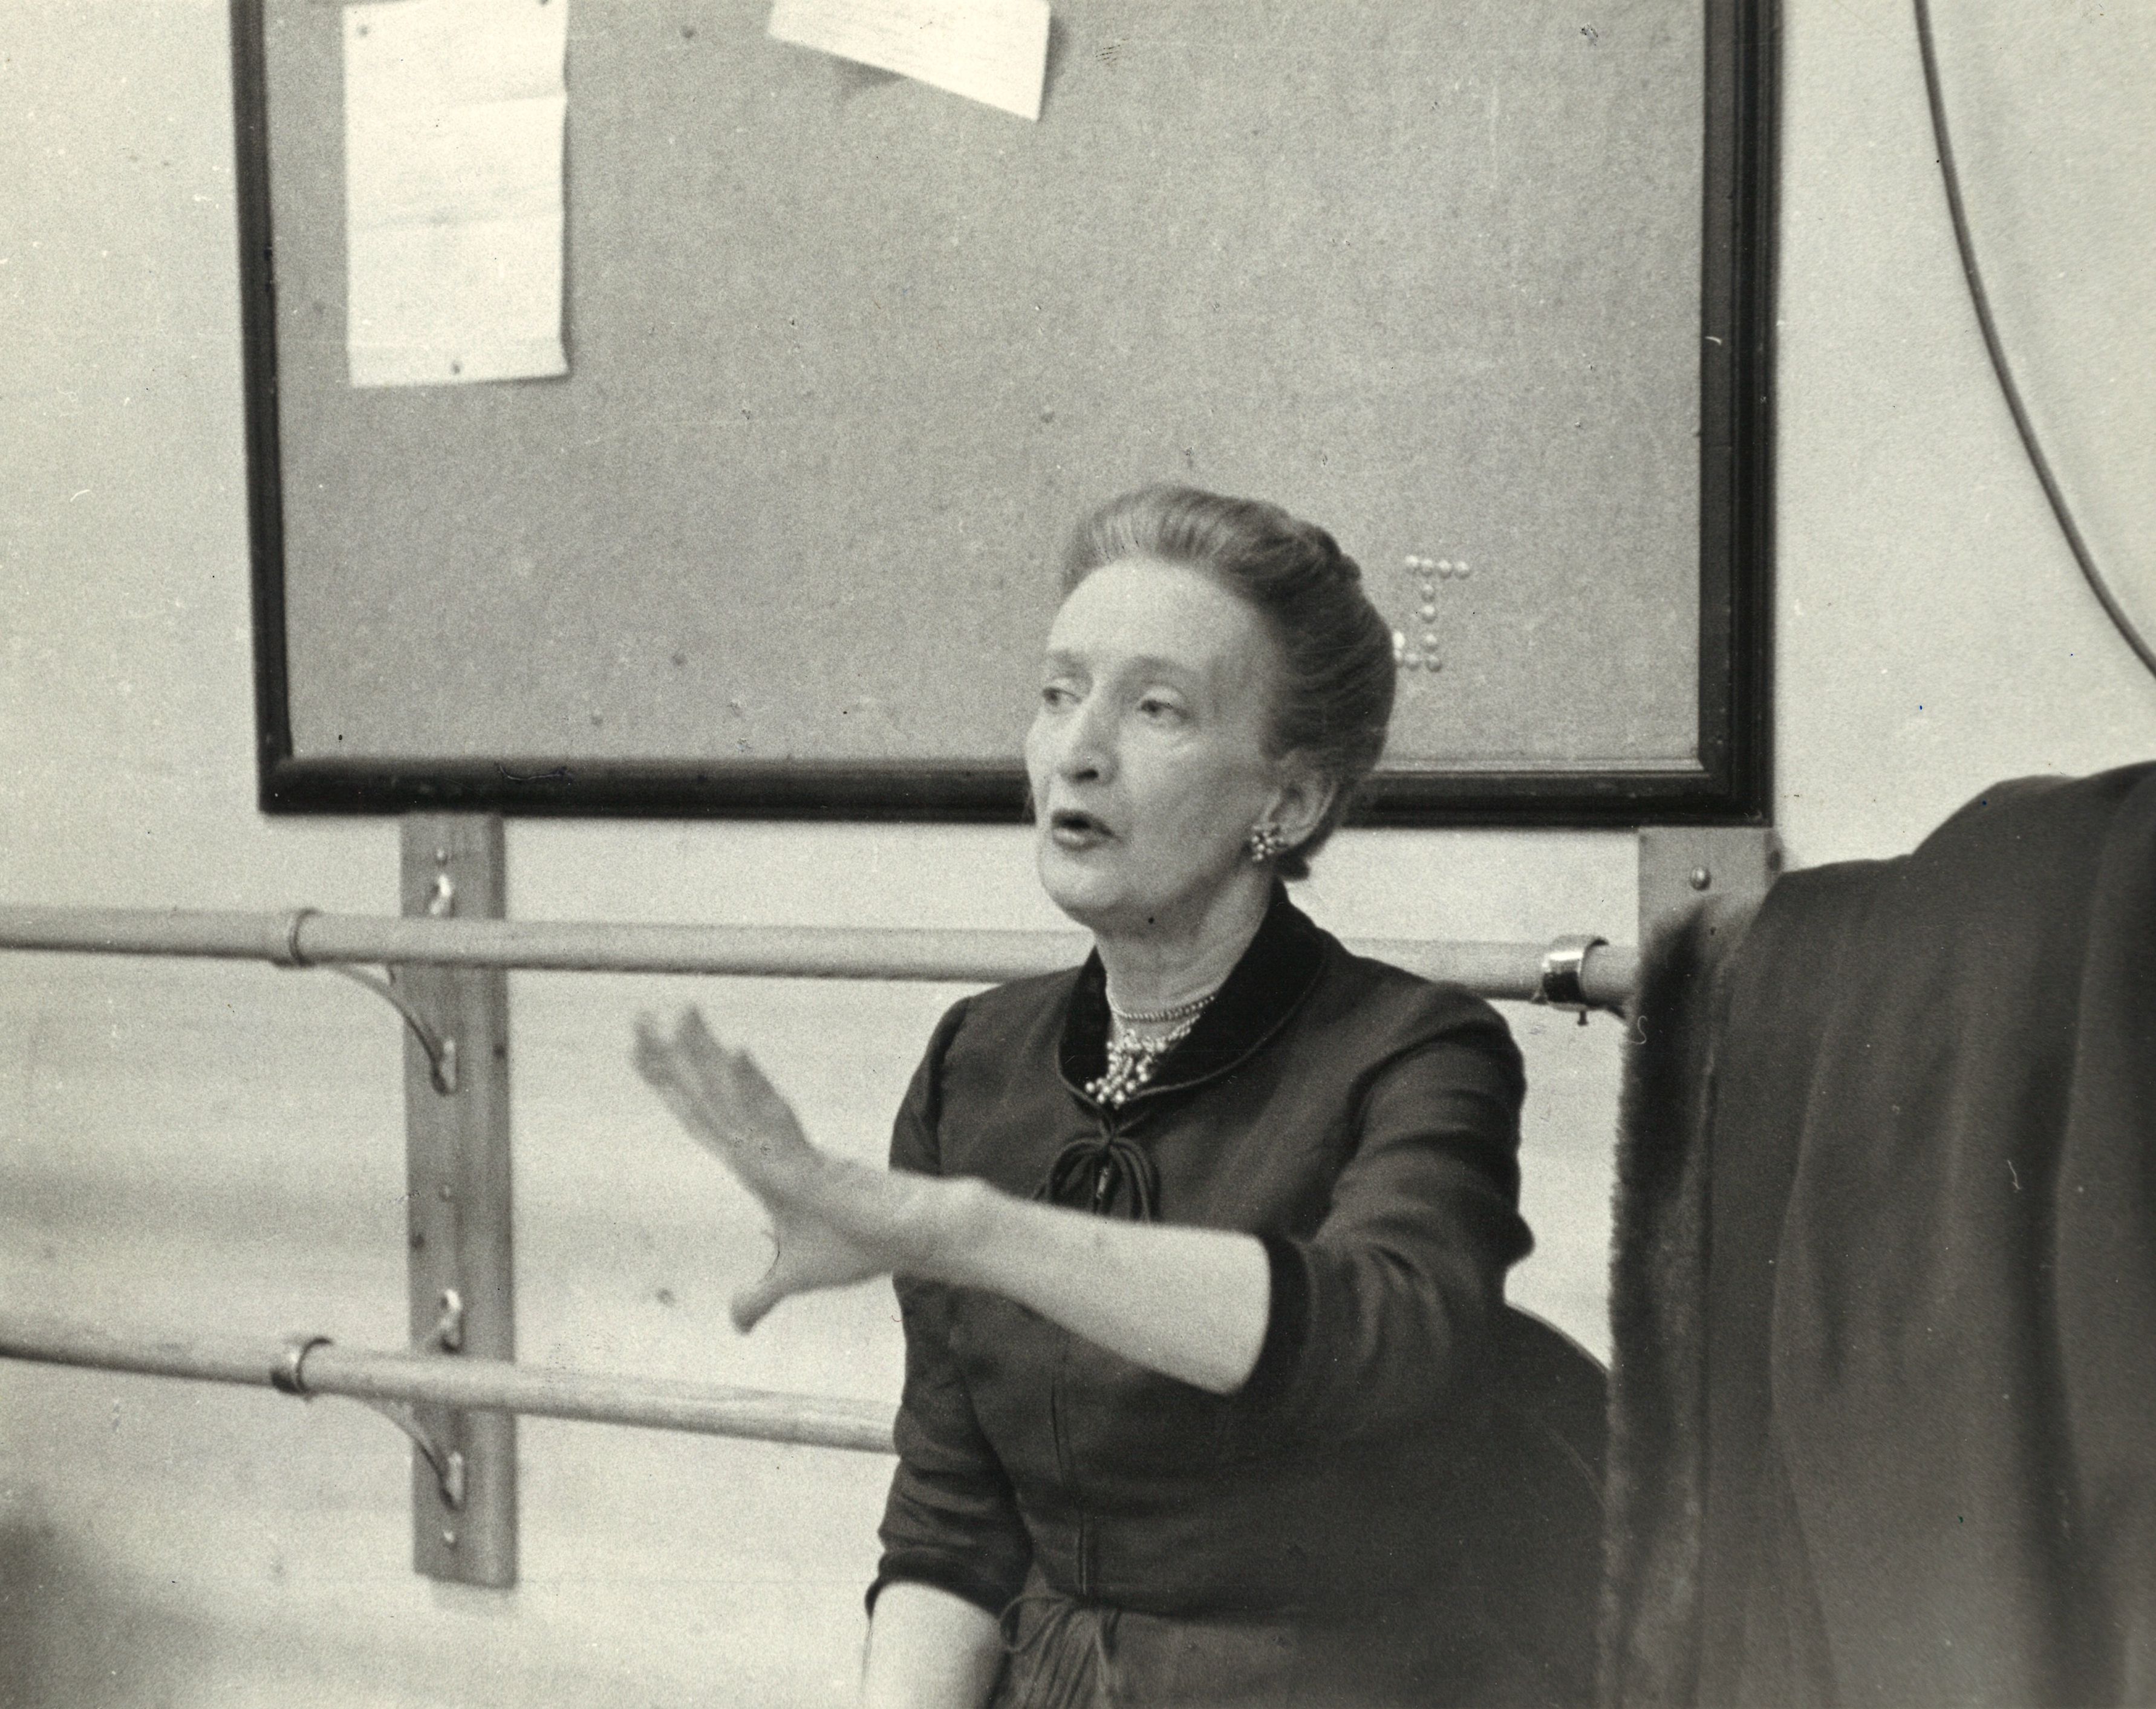 An older Doris Humphrey, wearing a high-necked blouse with pearls, hair elegantly pulled back, is caught mid-speech, gesturing with one hand as she sits in front of wall barres.